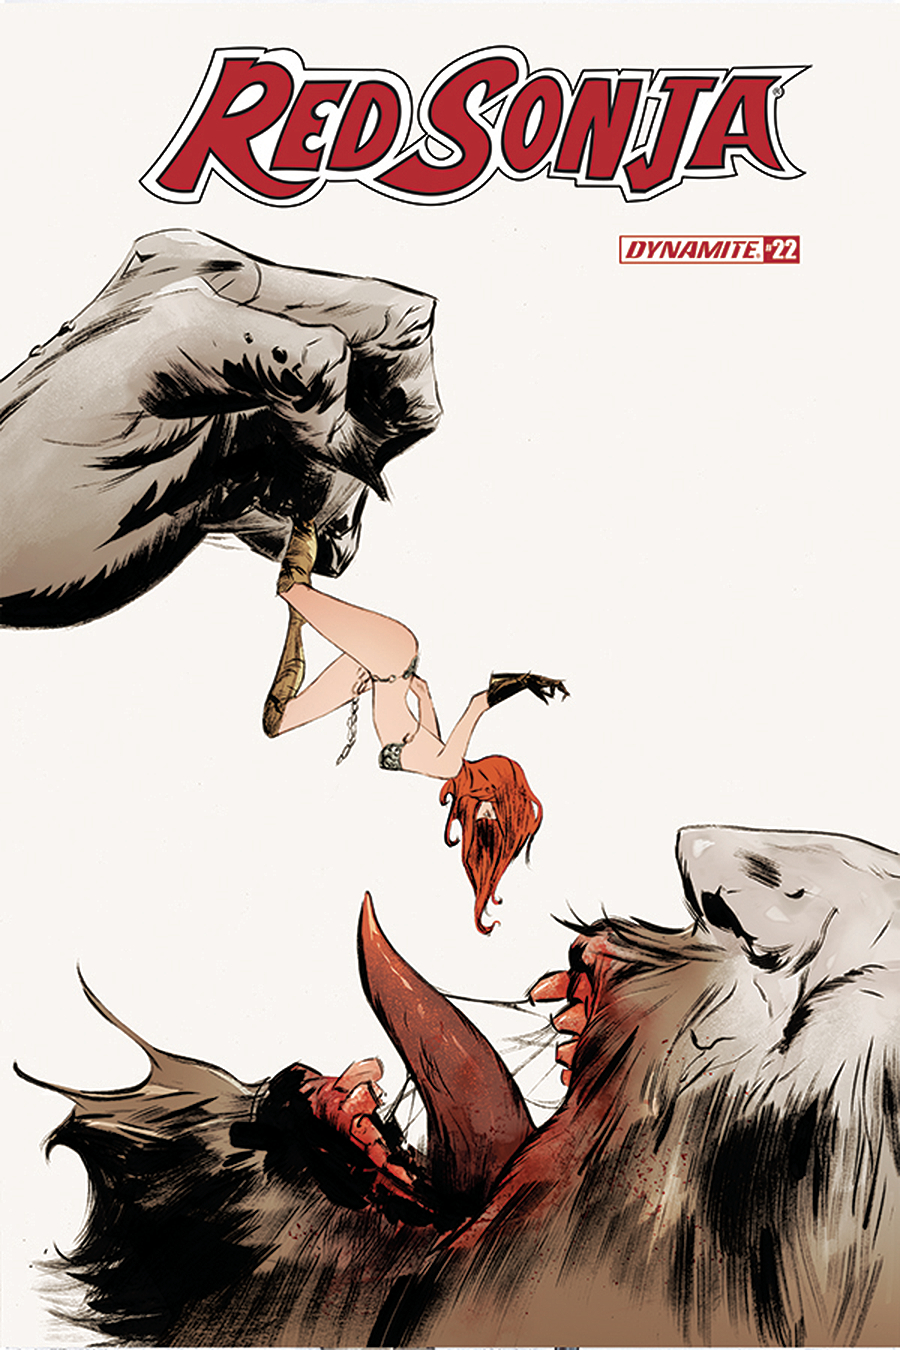 Red Sonja #22 Cover A Lee